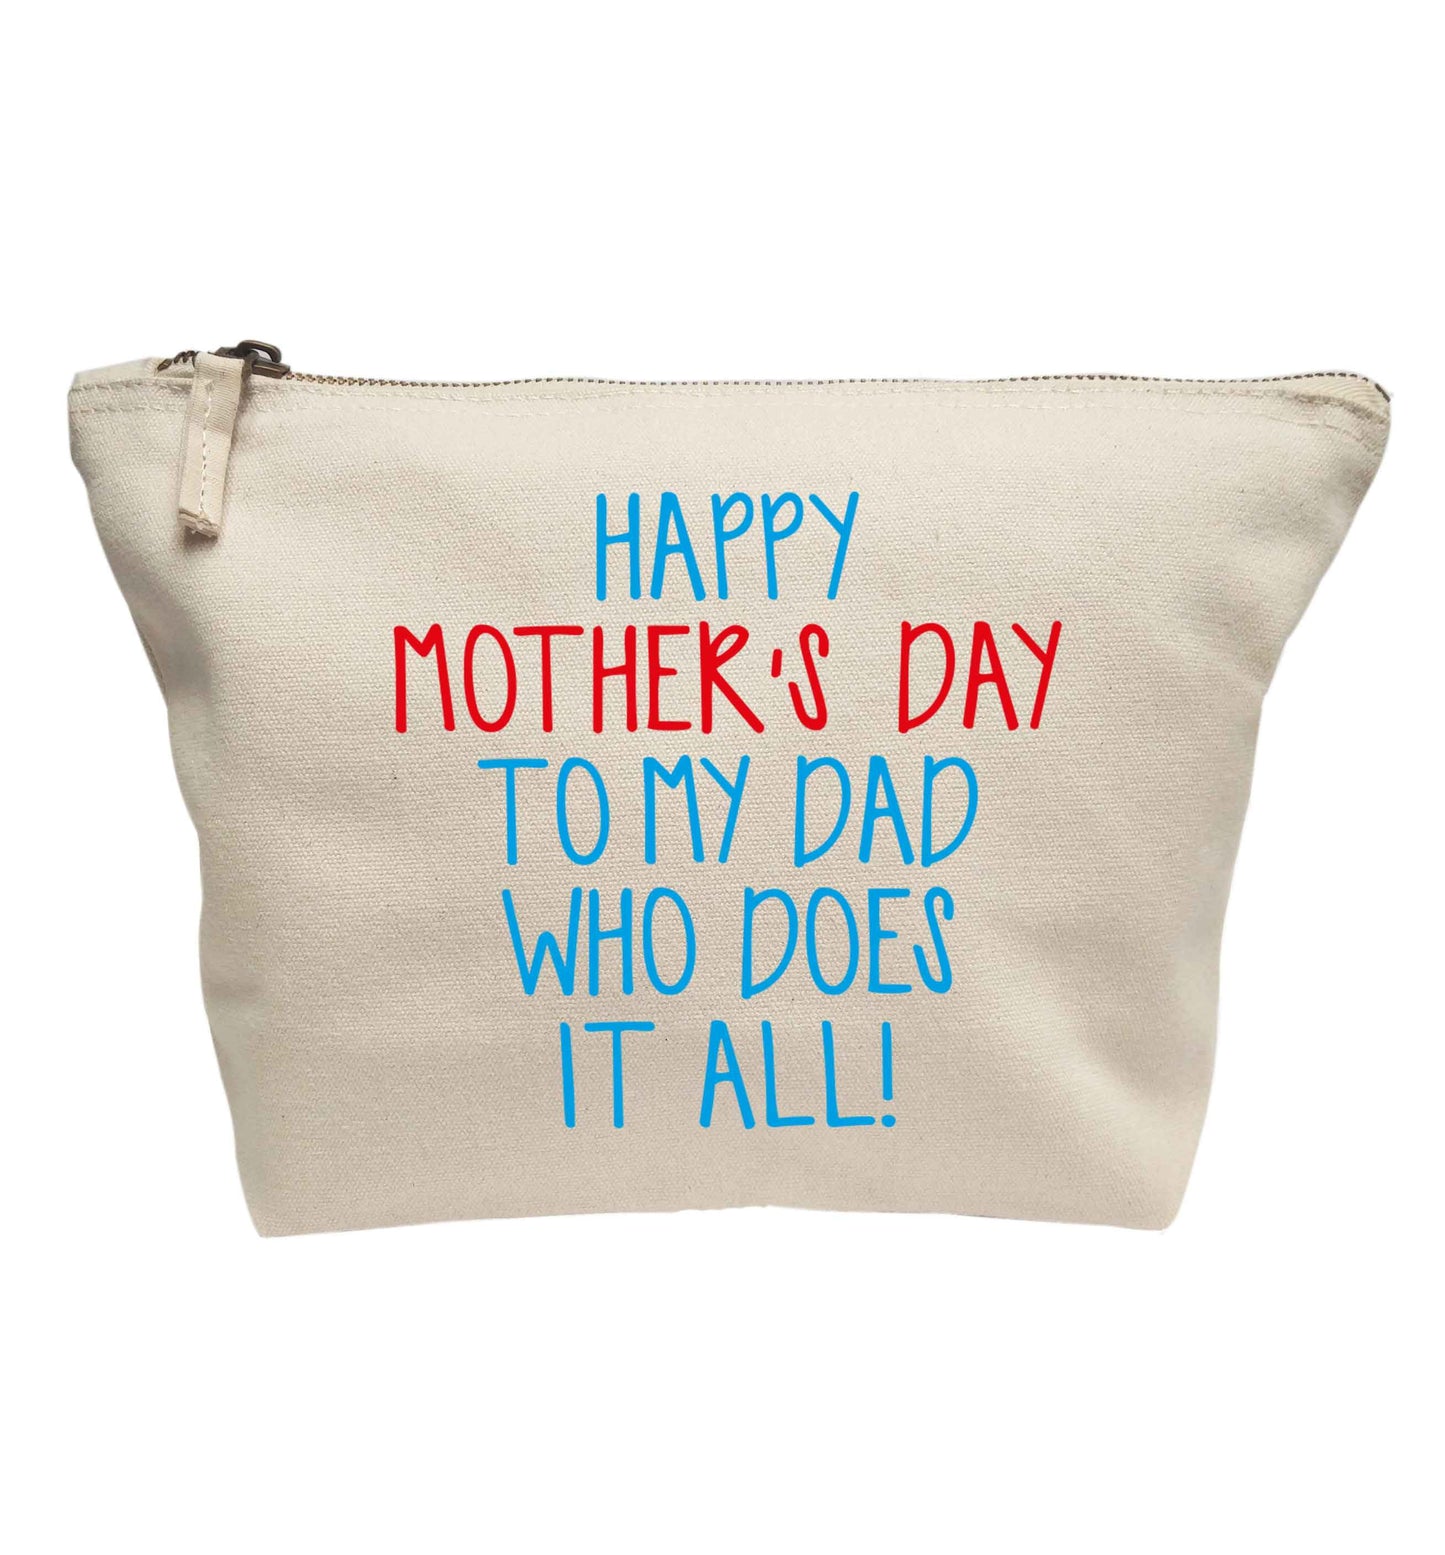 Happy mother's day to my dad who does it all! | Makeup / wash bag